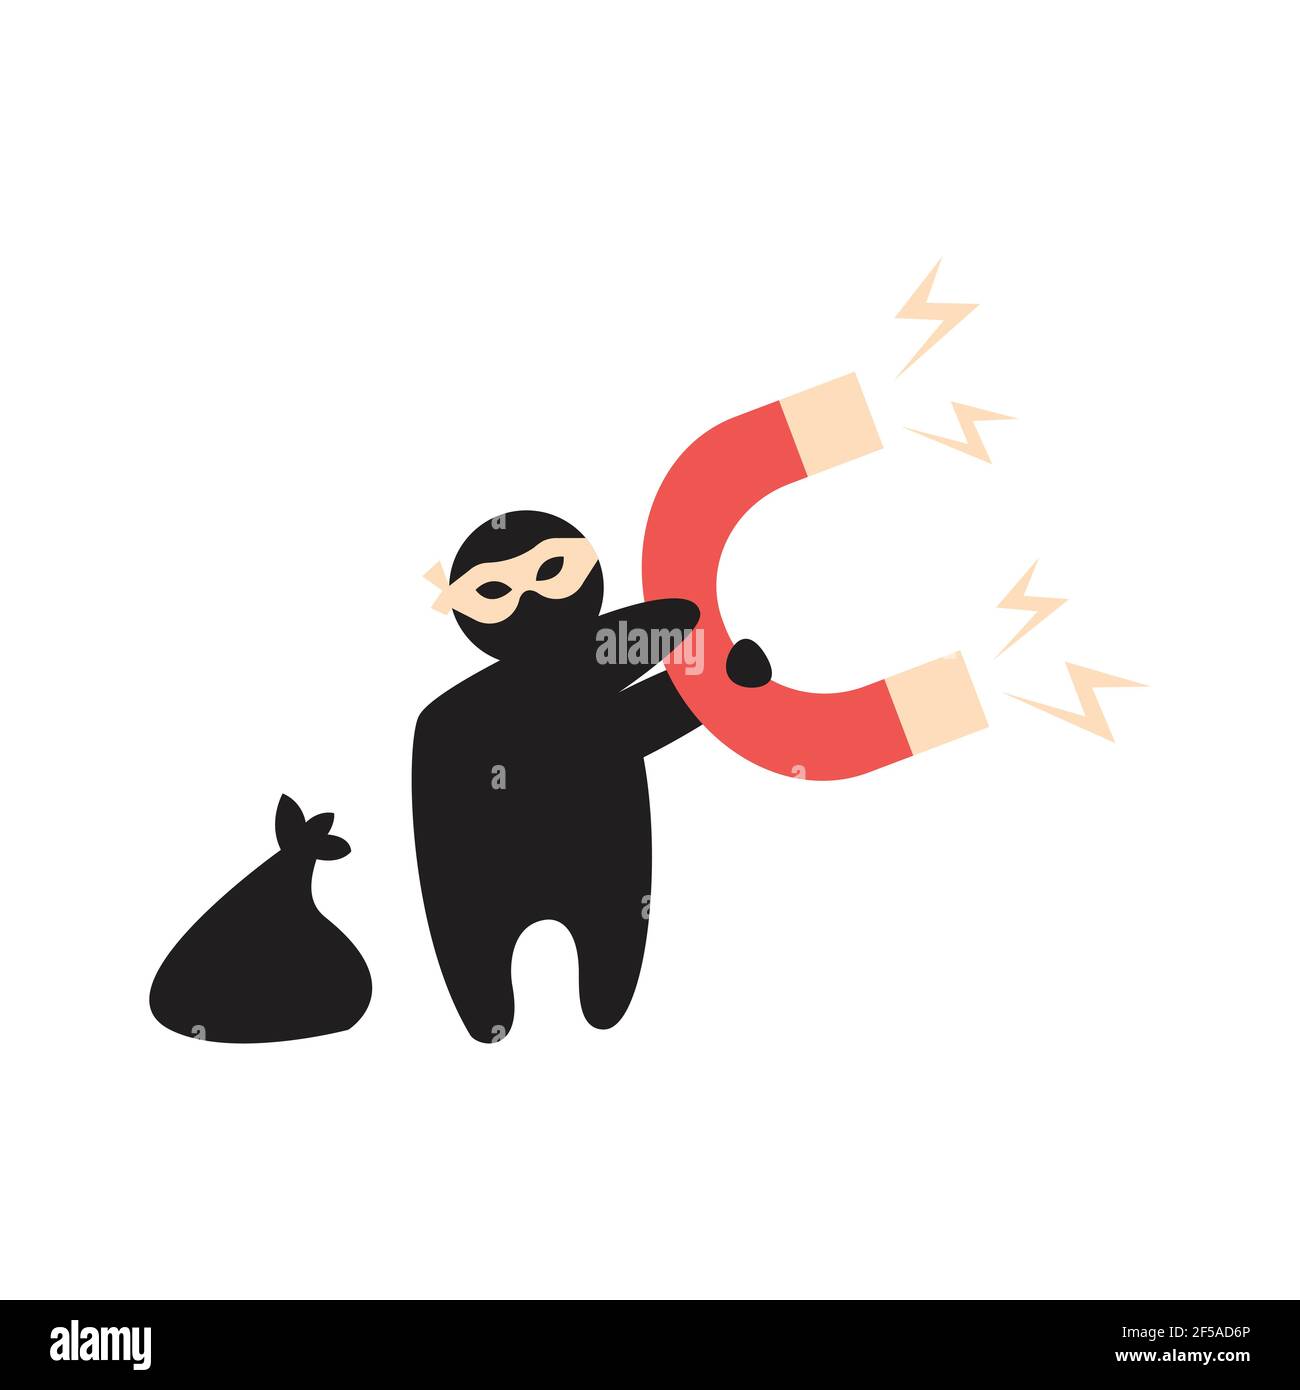 Idea robber holds magnet, draw light bulbs to steal thought, plagiarism vector illustration. Stock Vector